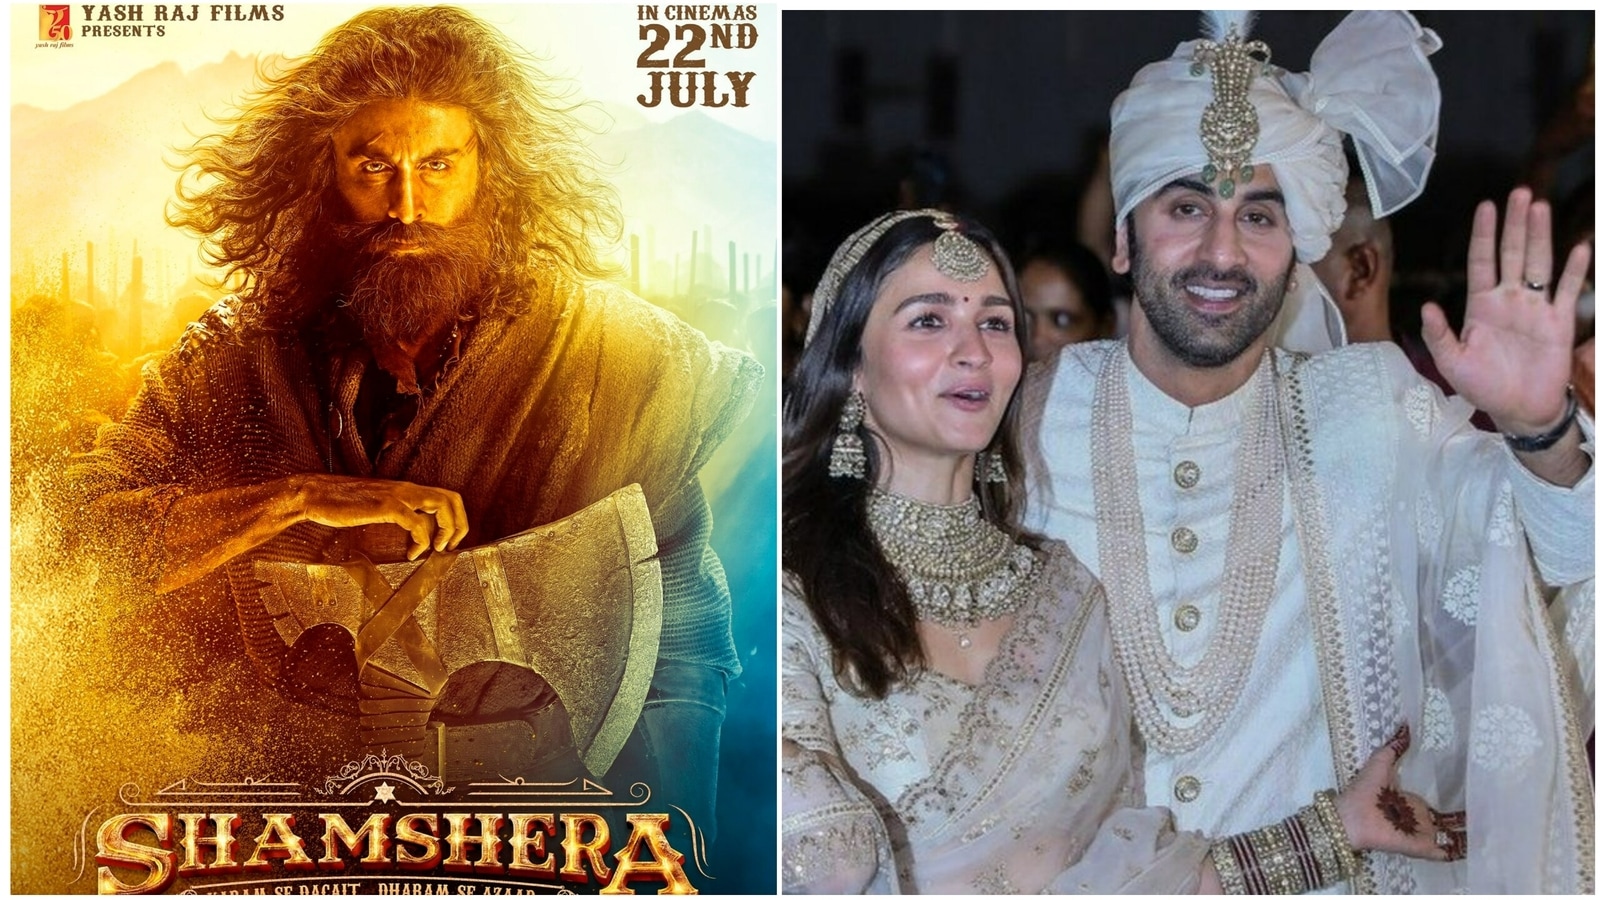 Ranbir Kapoor Surprises Fans, Leaves Them Emotional As He Meets Them For  Shamshera Poster Launch - News18